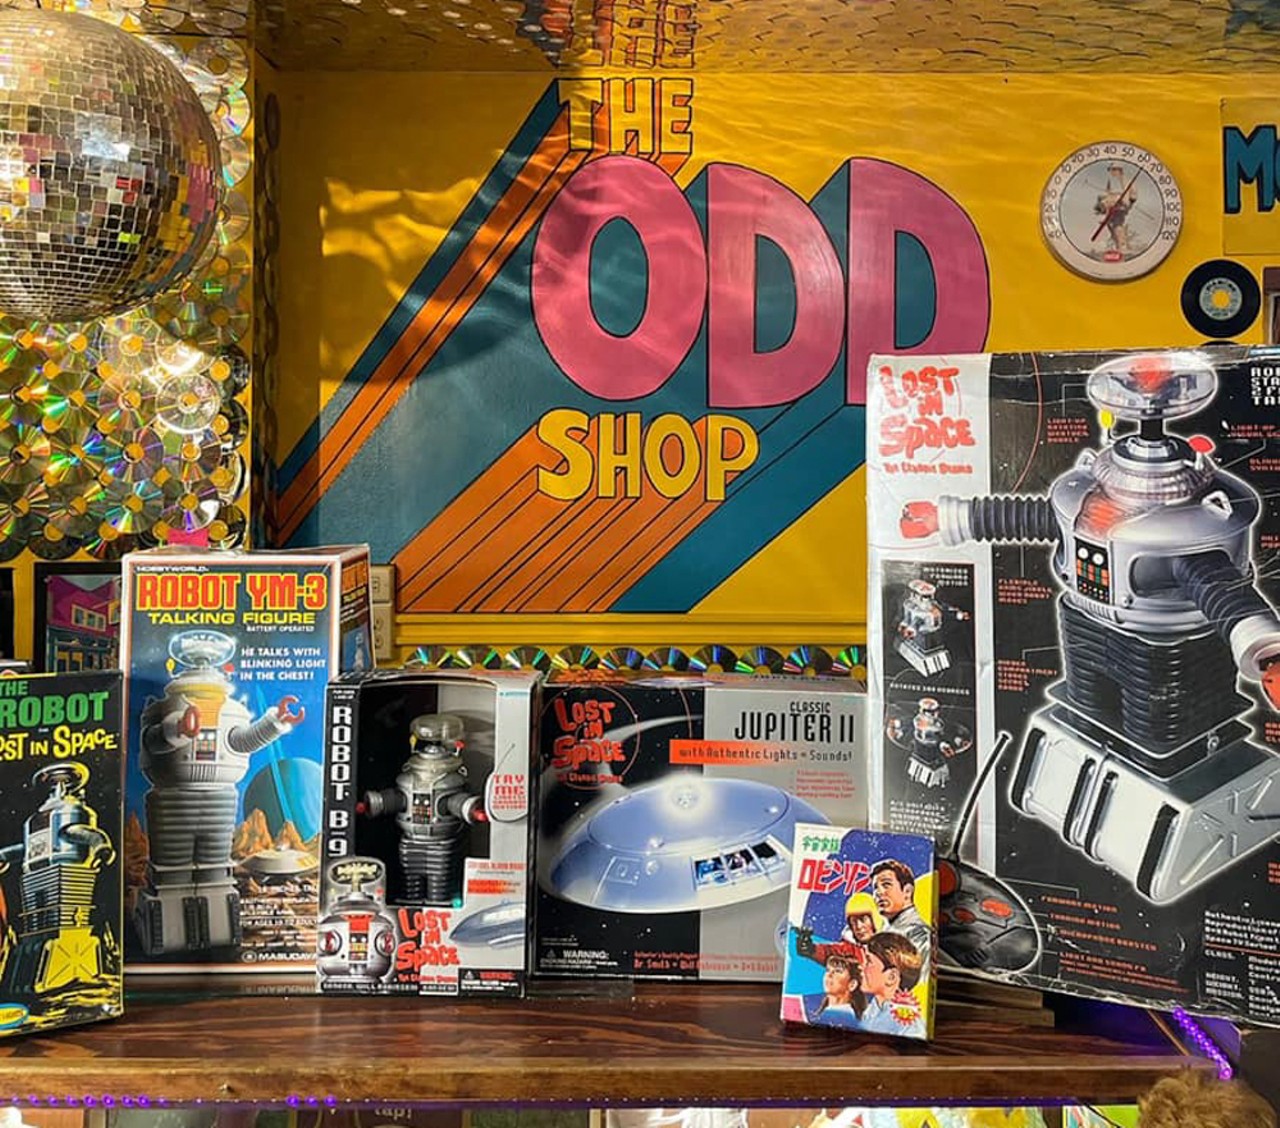  The Odd Shop 
155 E. Main St, New Albany, IN
This quirky shop, part of the Southern Indiana Fun Trail, more or less lives up to its name &#151; it&#146;s got an eclectic mix of goods, including old toys and board games, VHS tapes, records, and more. Plus, the CD wall makes for a cool selfie spot.
Photo via newalbanyoddshop/Instagram